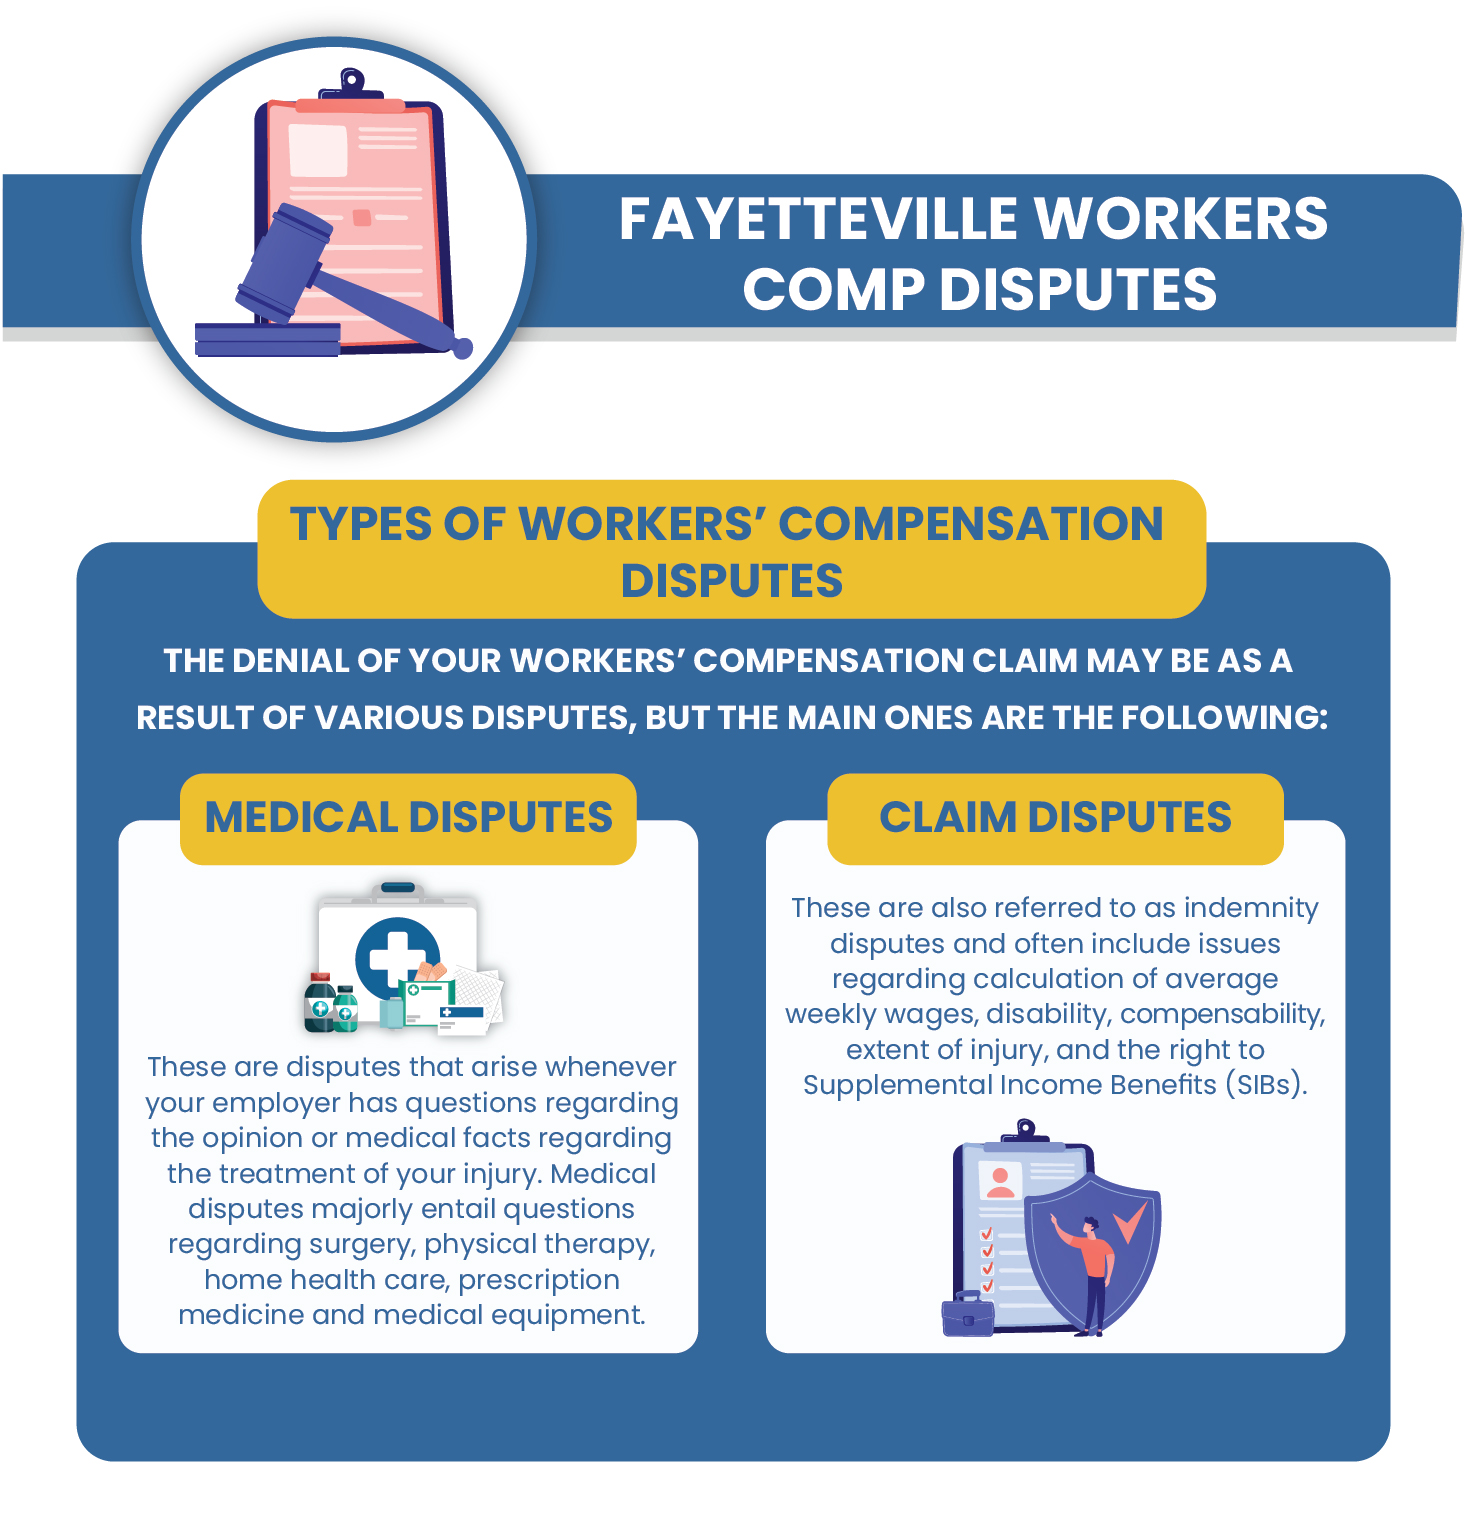 Fayetteville Workers Compensation Disputes Infographic